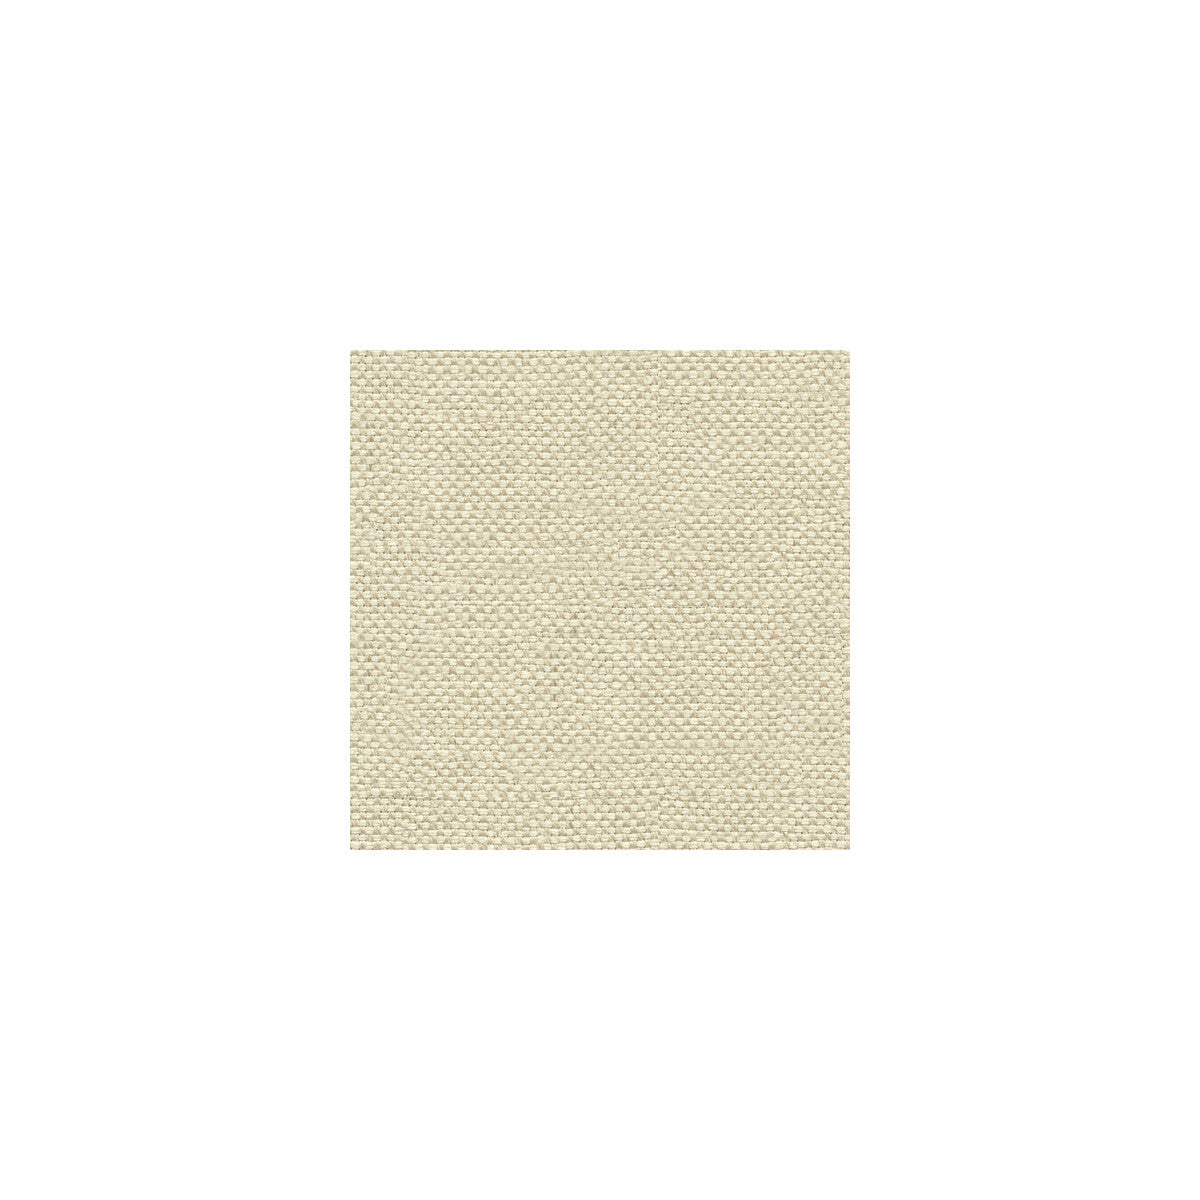 Kravet Basics fabric in 30445-1116 color - pattern 30445.1116.0 - by Kravet Basics in the Perfect Plains collection